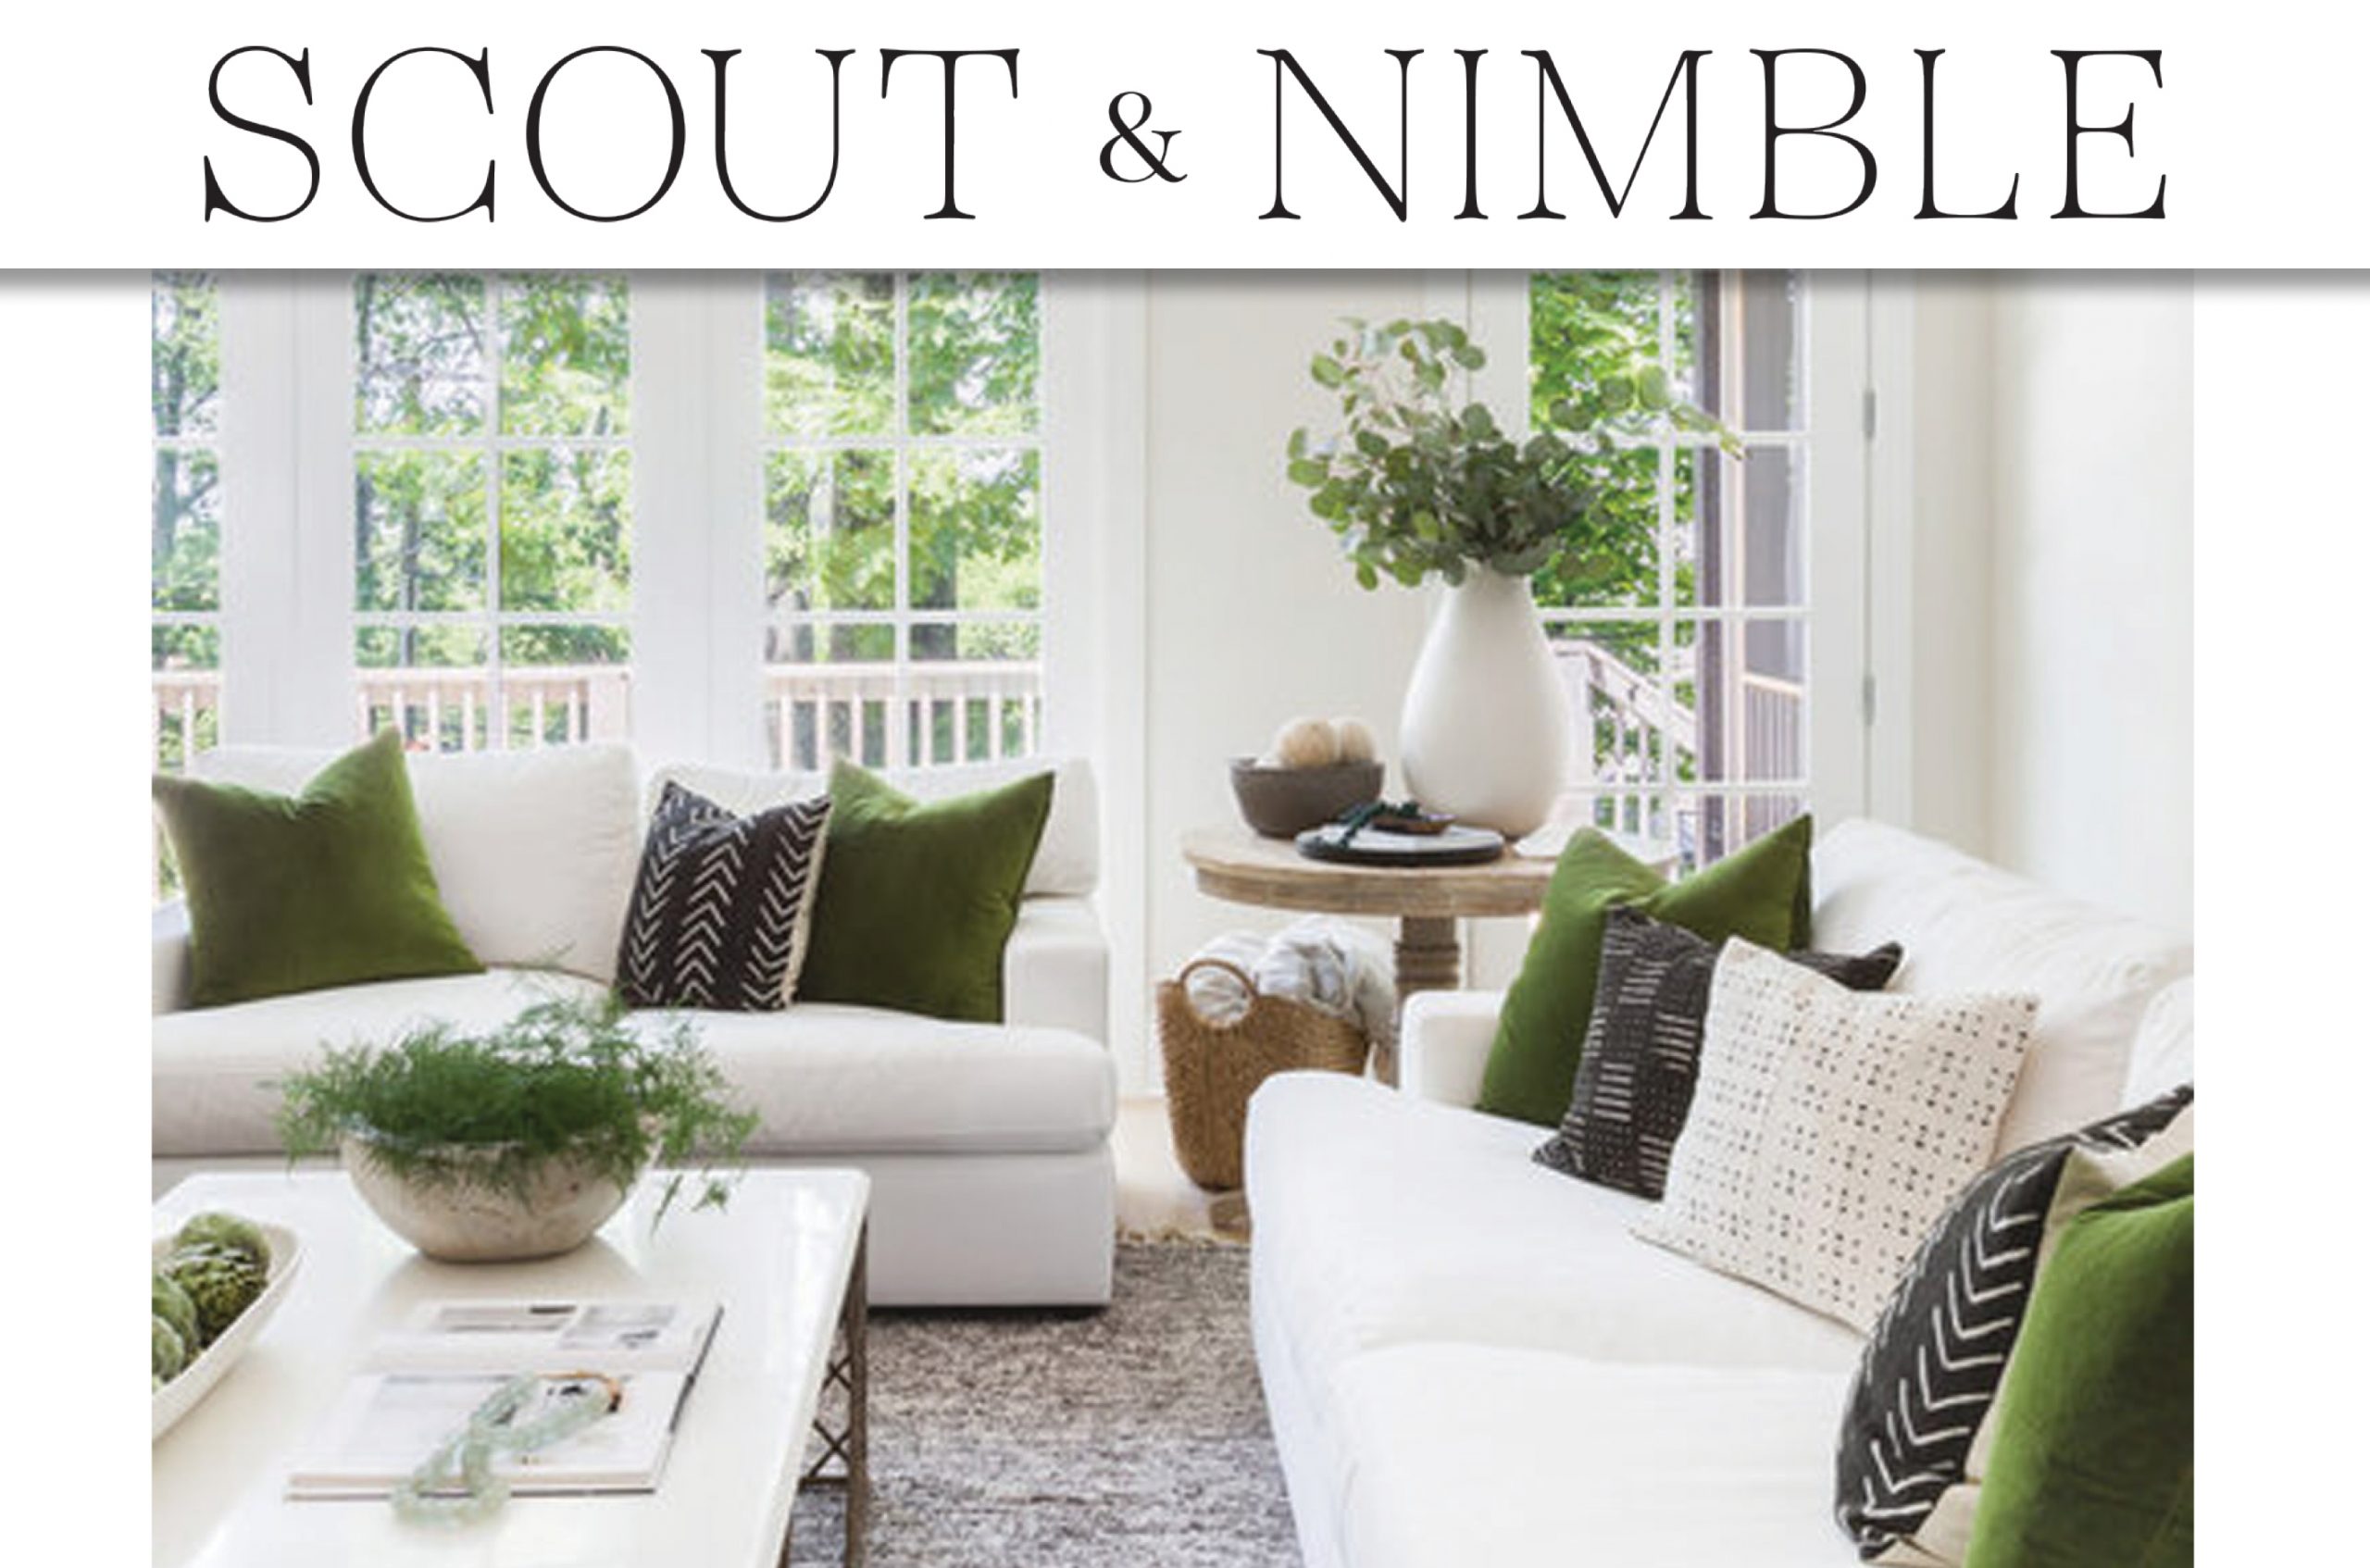 How to Style Throw Pillows Like a Pro - Wilmot's Decorating Center